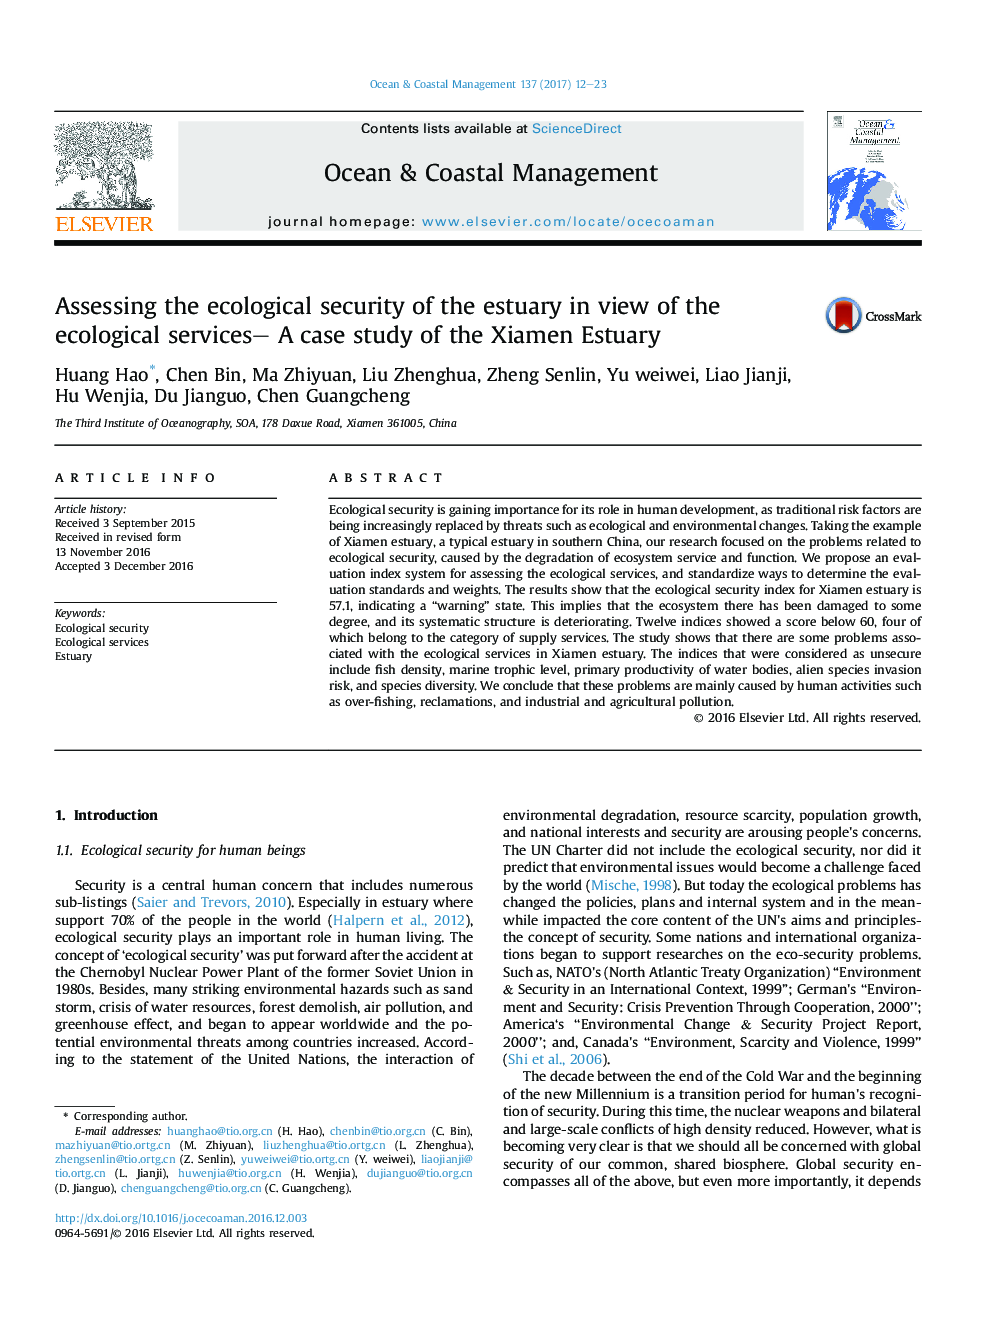 Assessing the ecological security of the estuary in view of the ecological services- A case study of the Xiamen Estuary